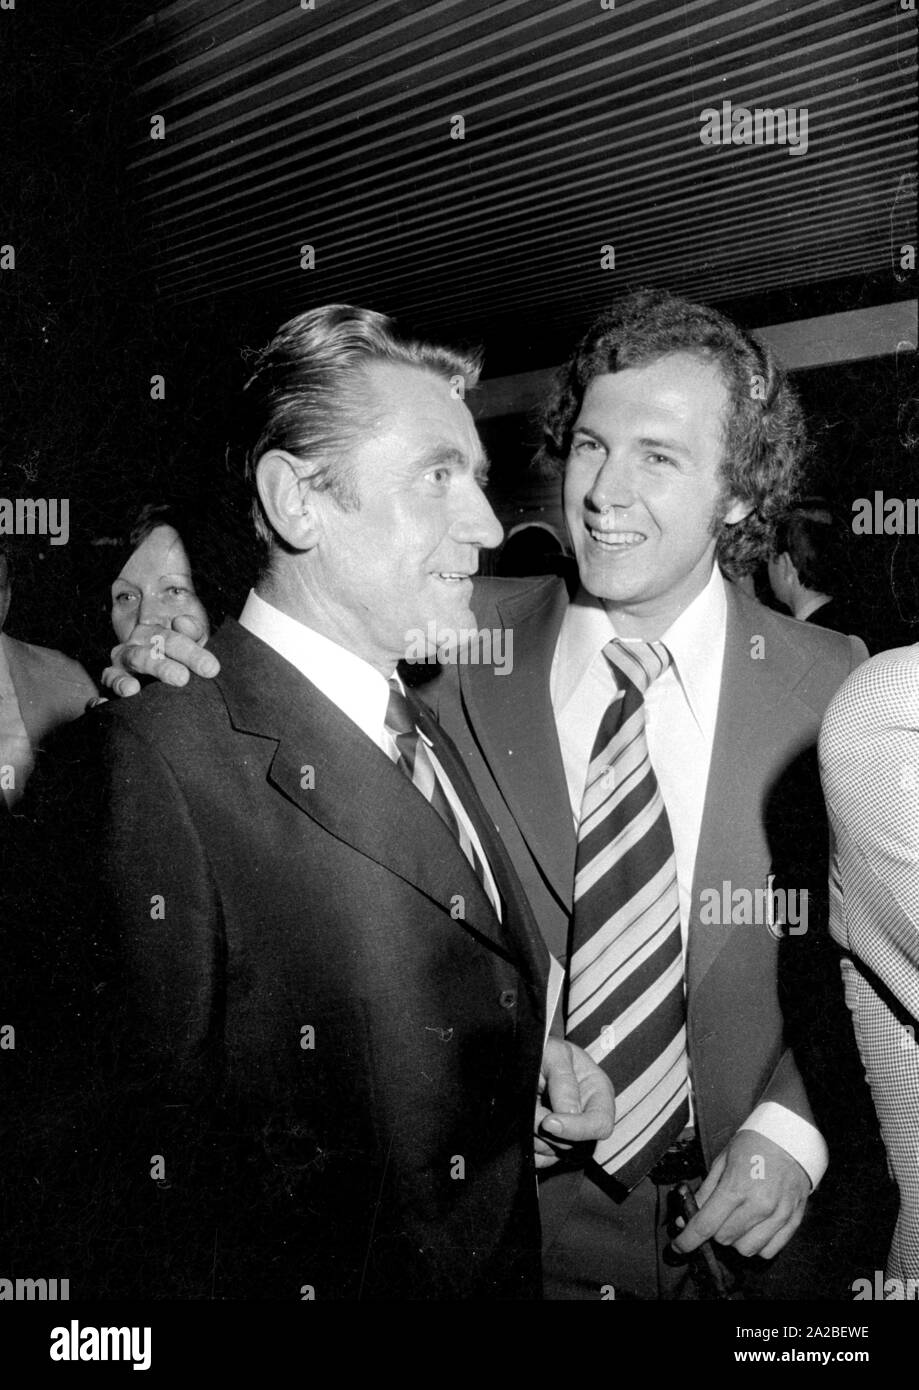 The Munich police chief Manfred Schreiber (left) and footballer Franz Beckenbauer (r.) at the banquet of the Federal President in the Hilton Hotel in Munich. Stock Photo